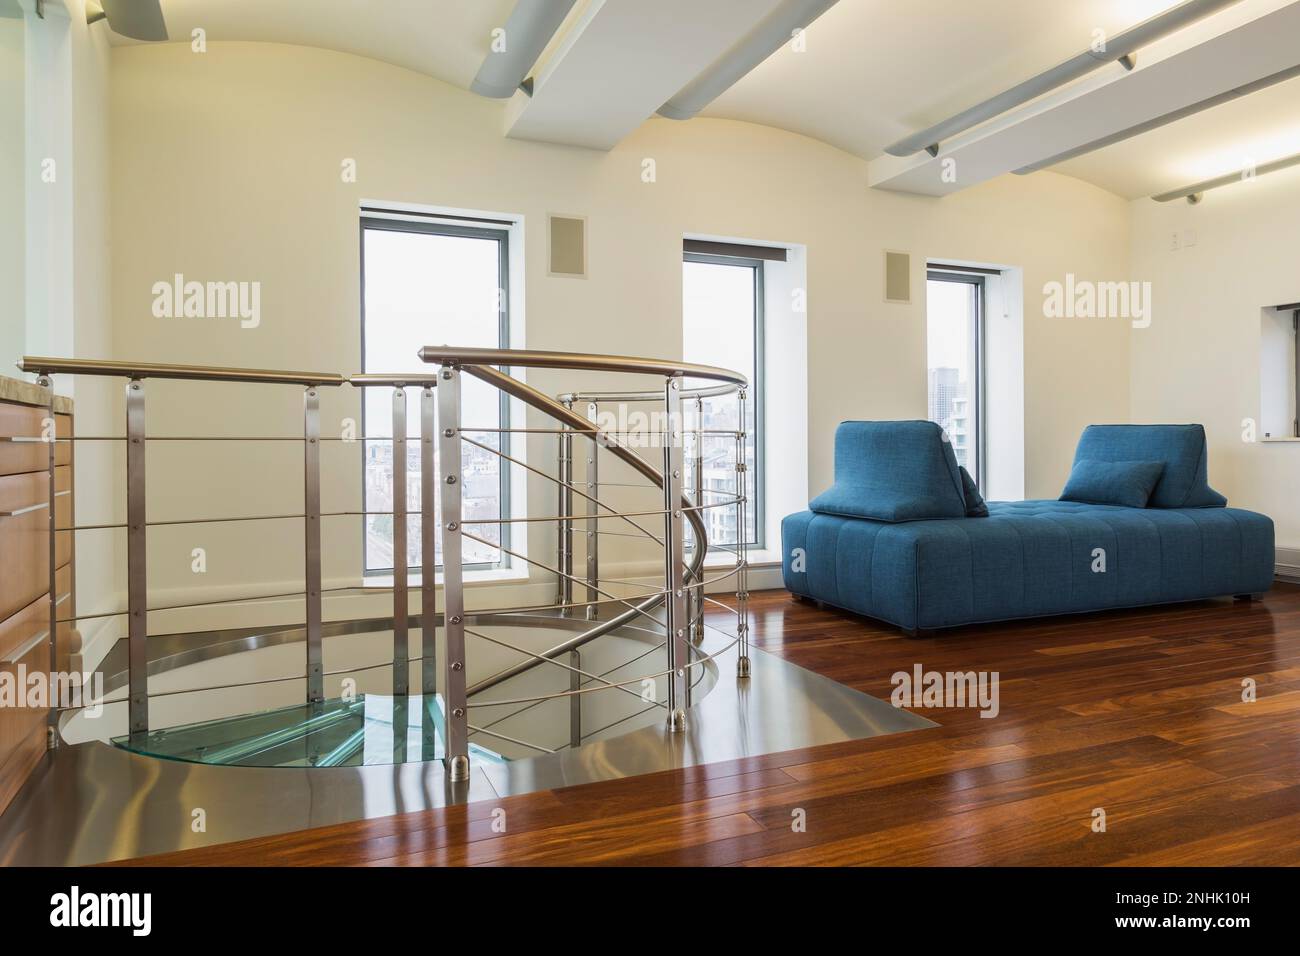 Steel and tempered glass spiraling staircase with blue cloth upholstered daybed in home office with exotic wood cabinet and floor inside condo unit. Stock Photo